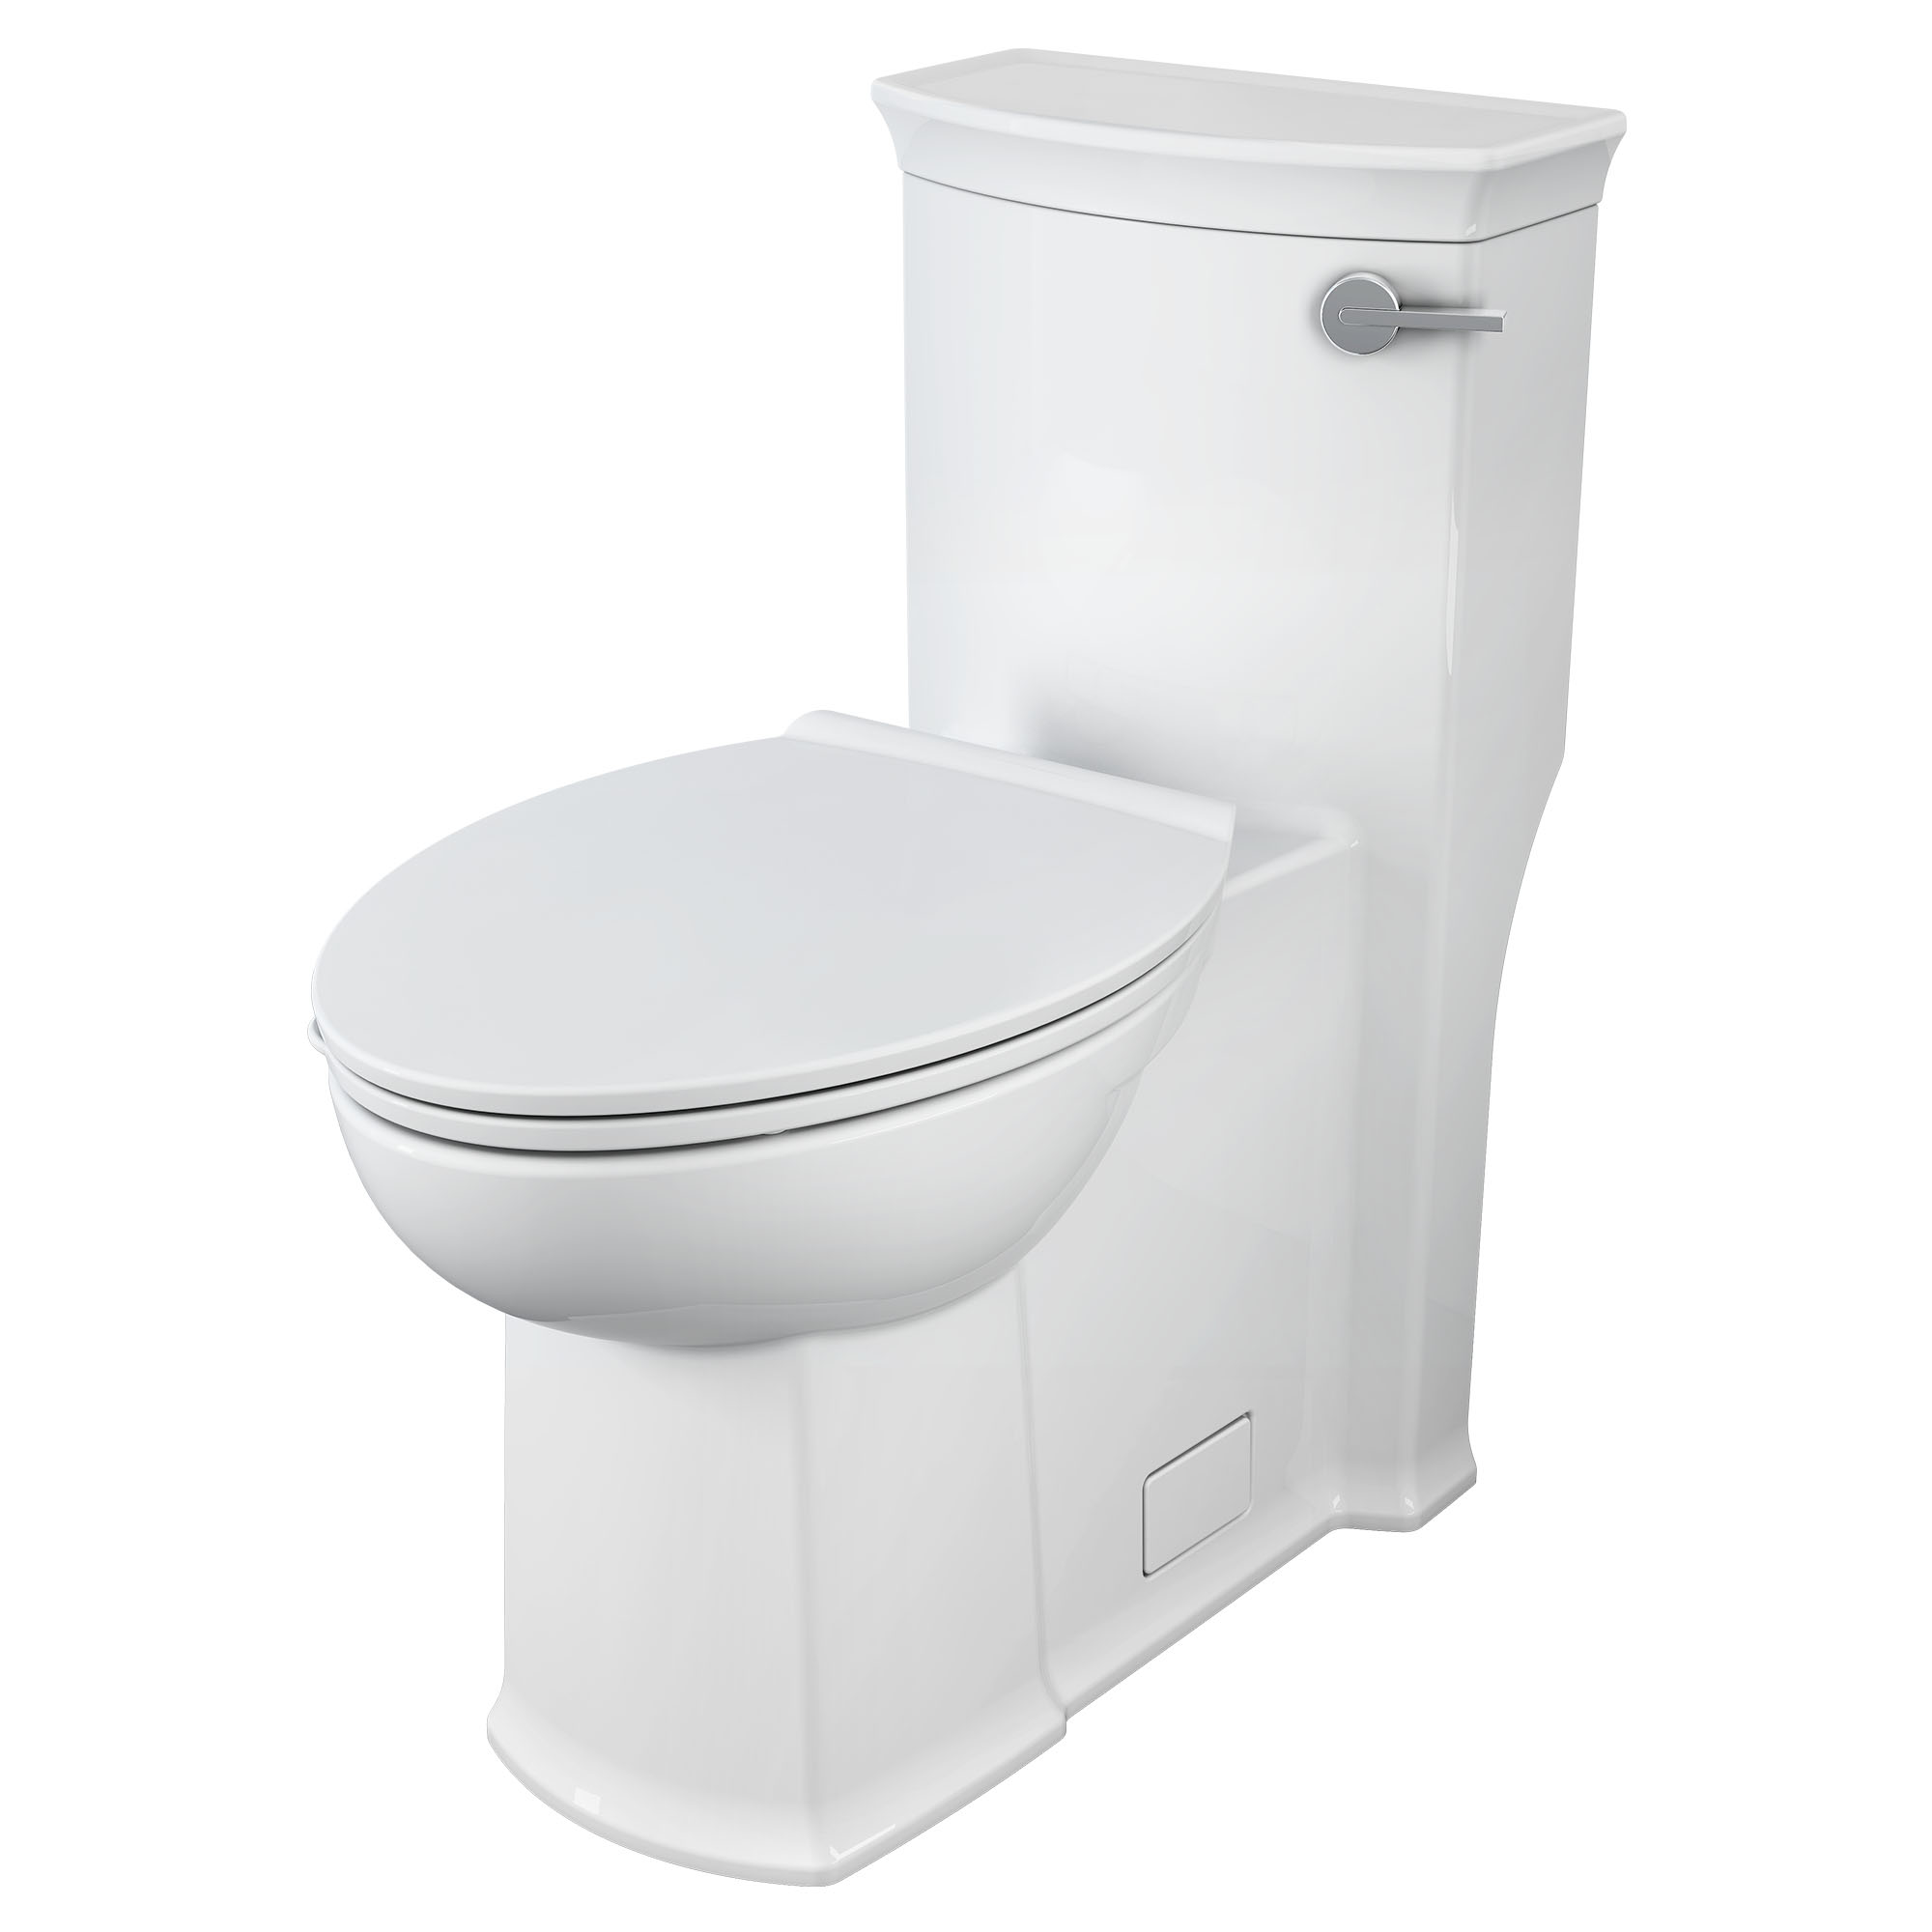 Wyatt® One-Piece Chair-Height Right-Hand Trip Lever Elongated Toilet with Seat